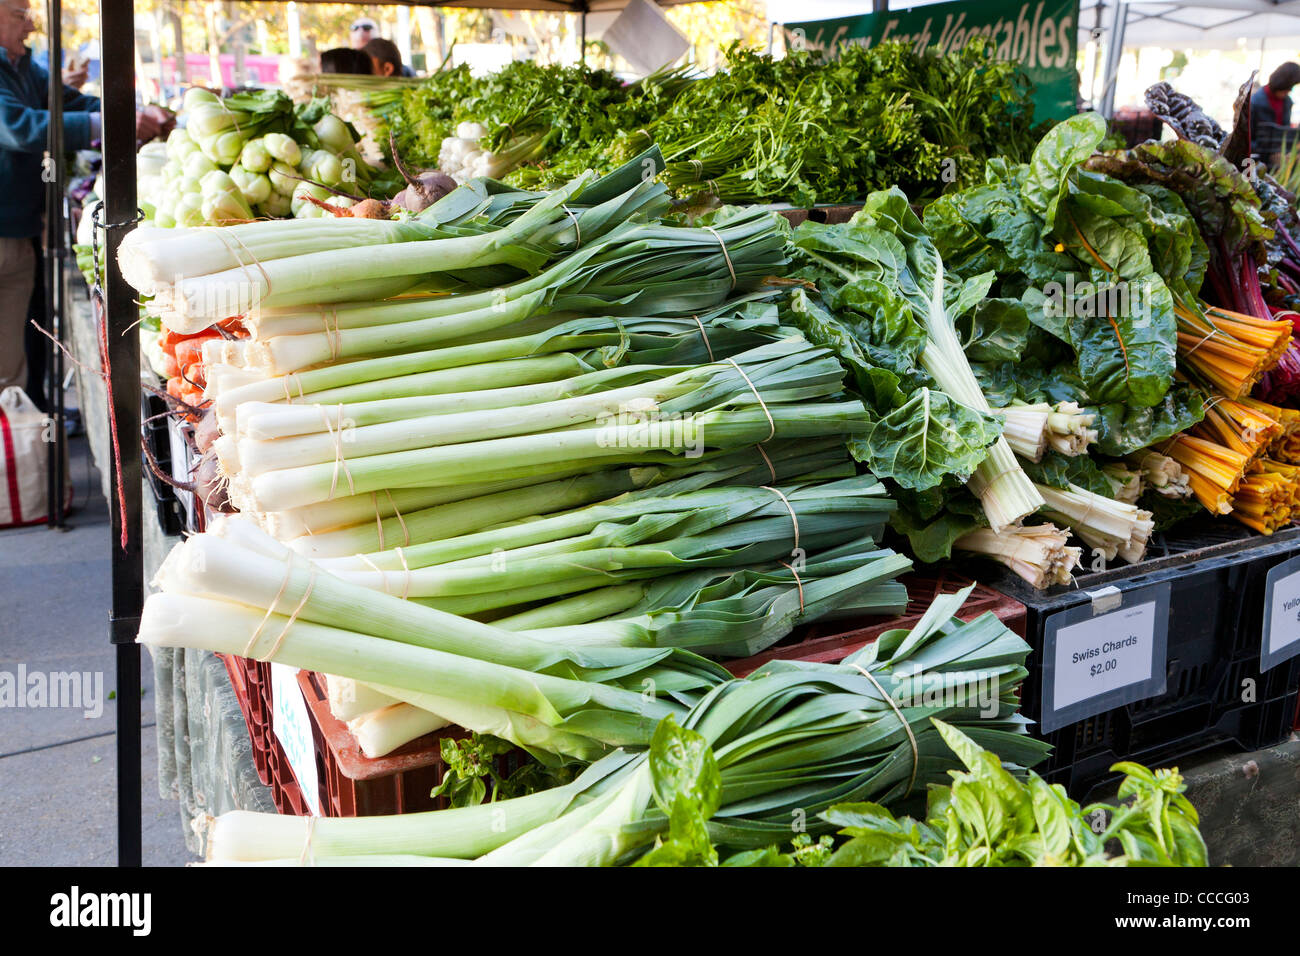 Bunches of organic leeks and chards at a local farmers market - San Francisco, California USA Stock Photo